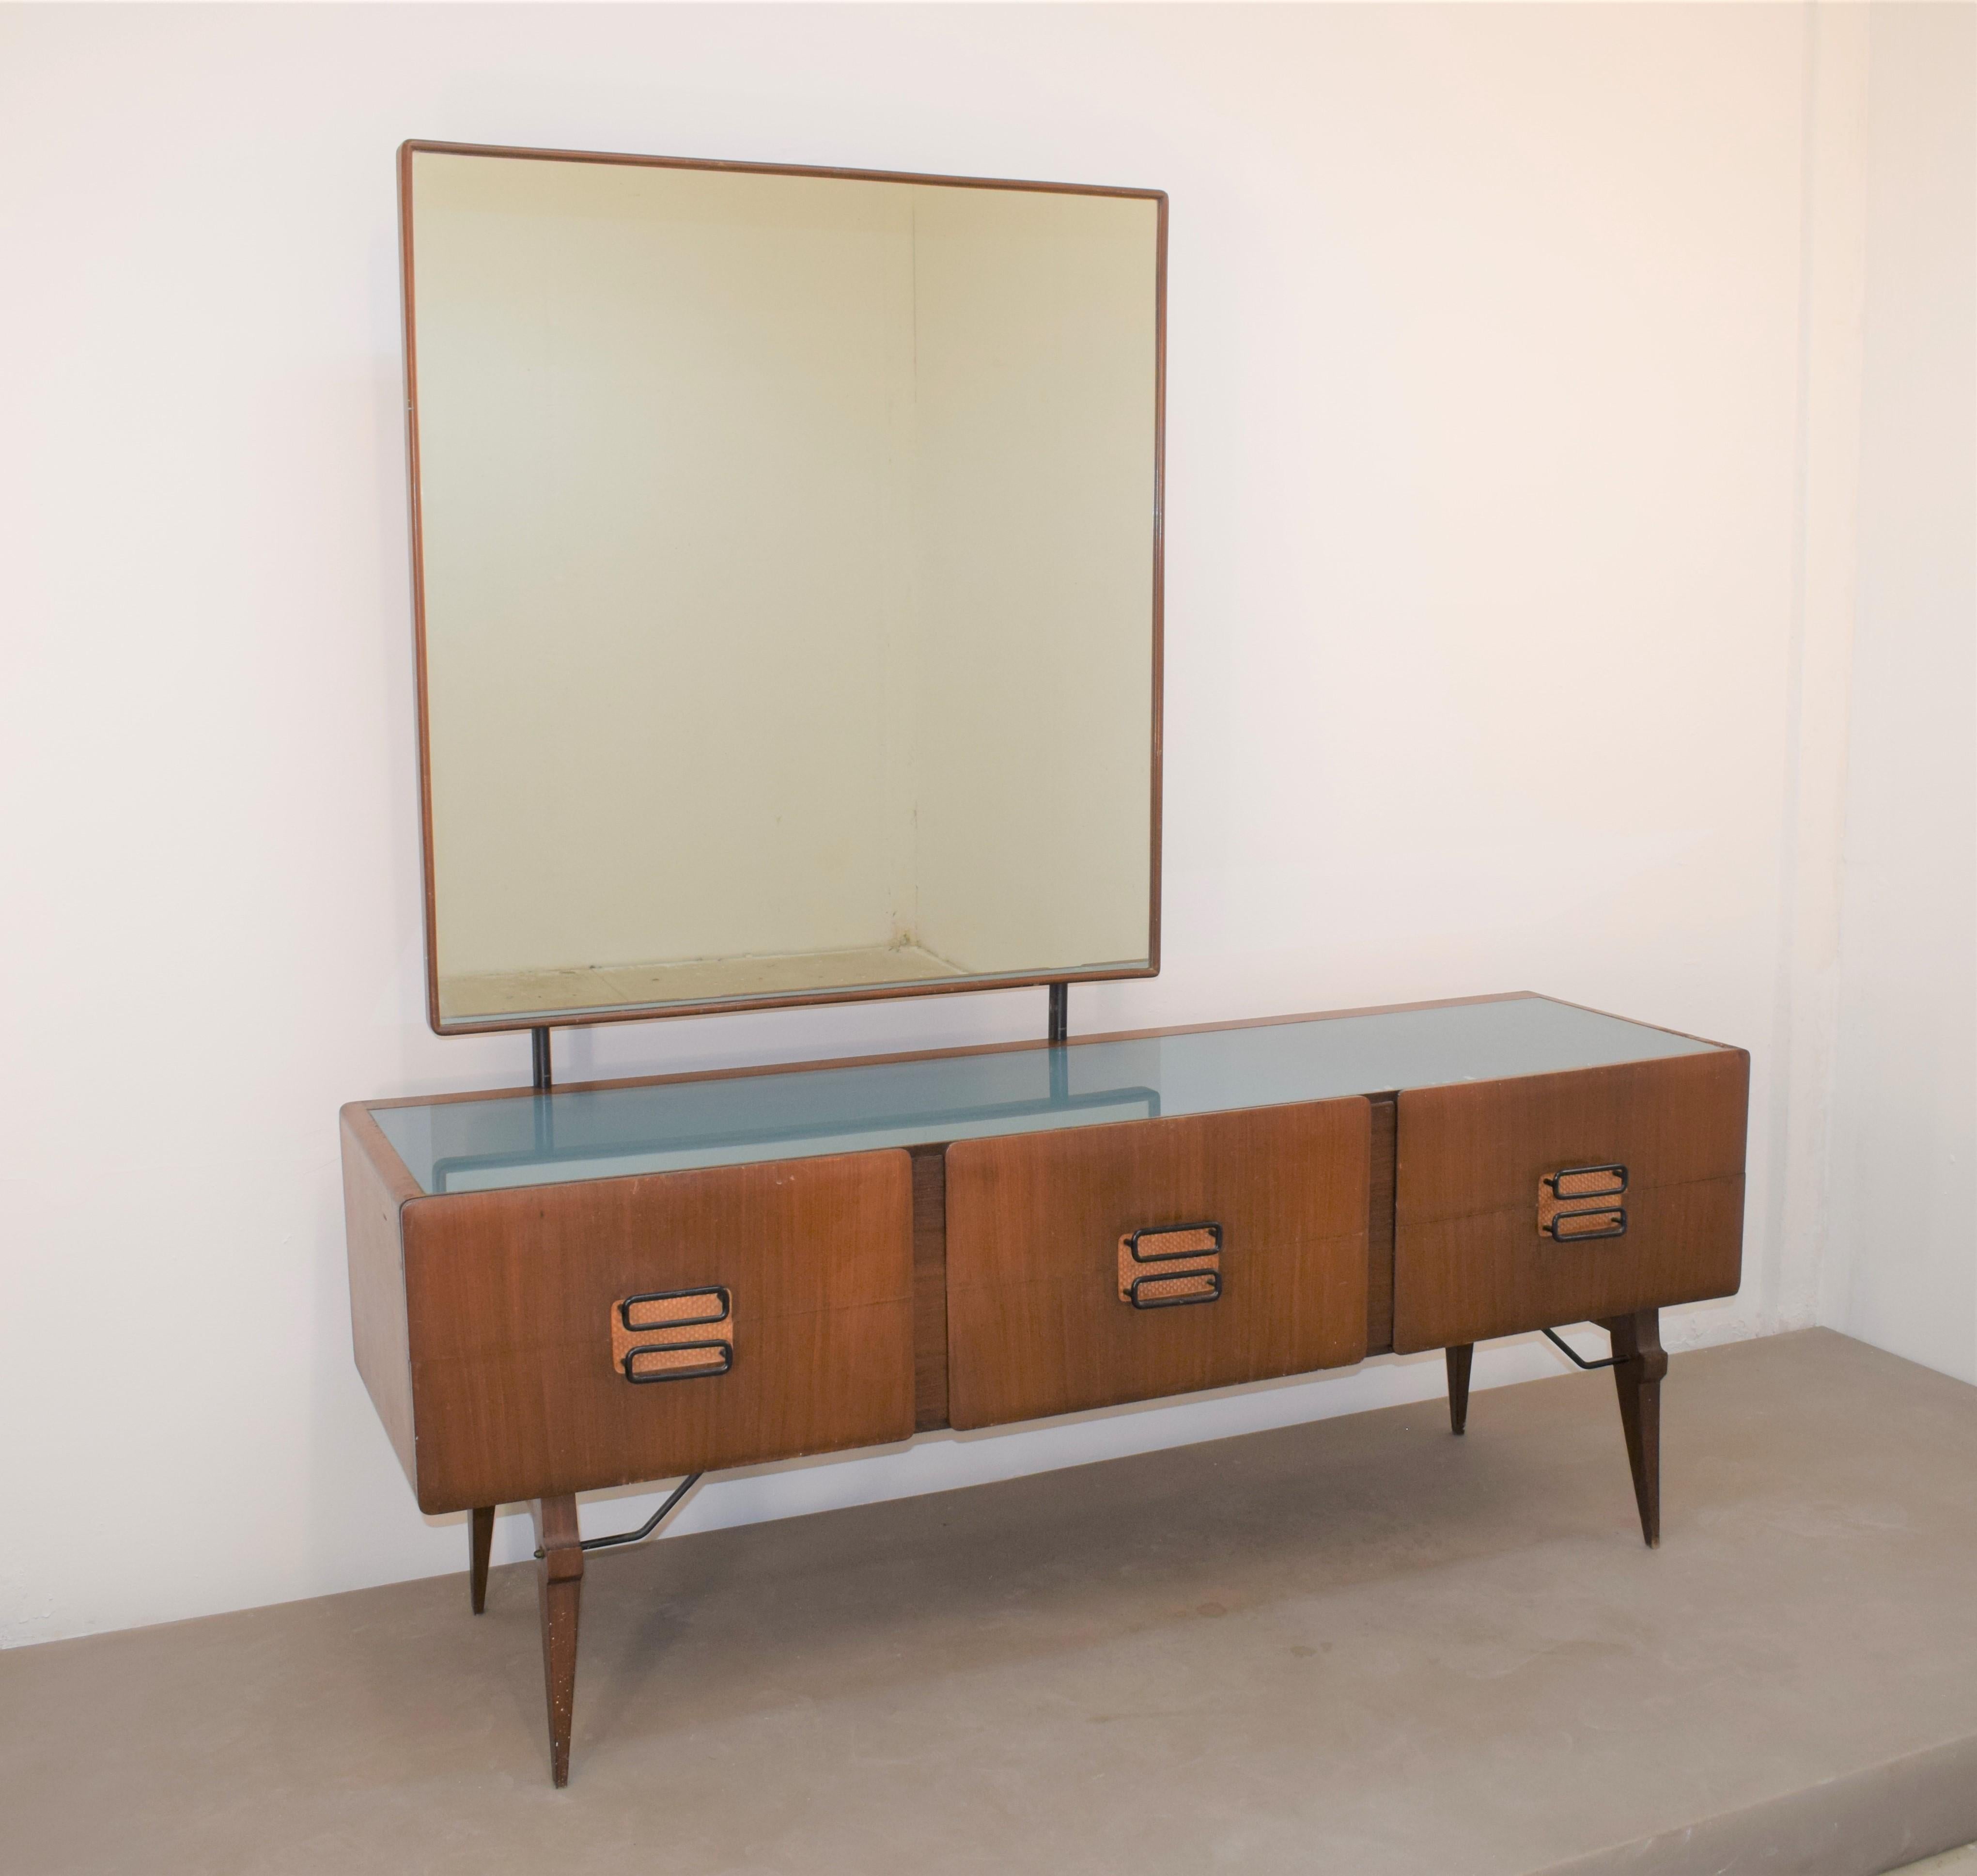 Italian chest of drawers with mirror, 1960s.
Dimensions: H=184 cm; W=180 cm; D=50 cm.
Only mirror: H=107cm ; W= 101 cm; D=4 cm.